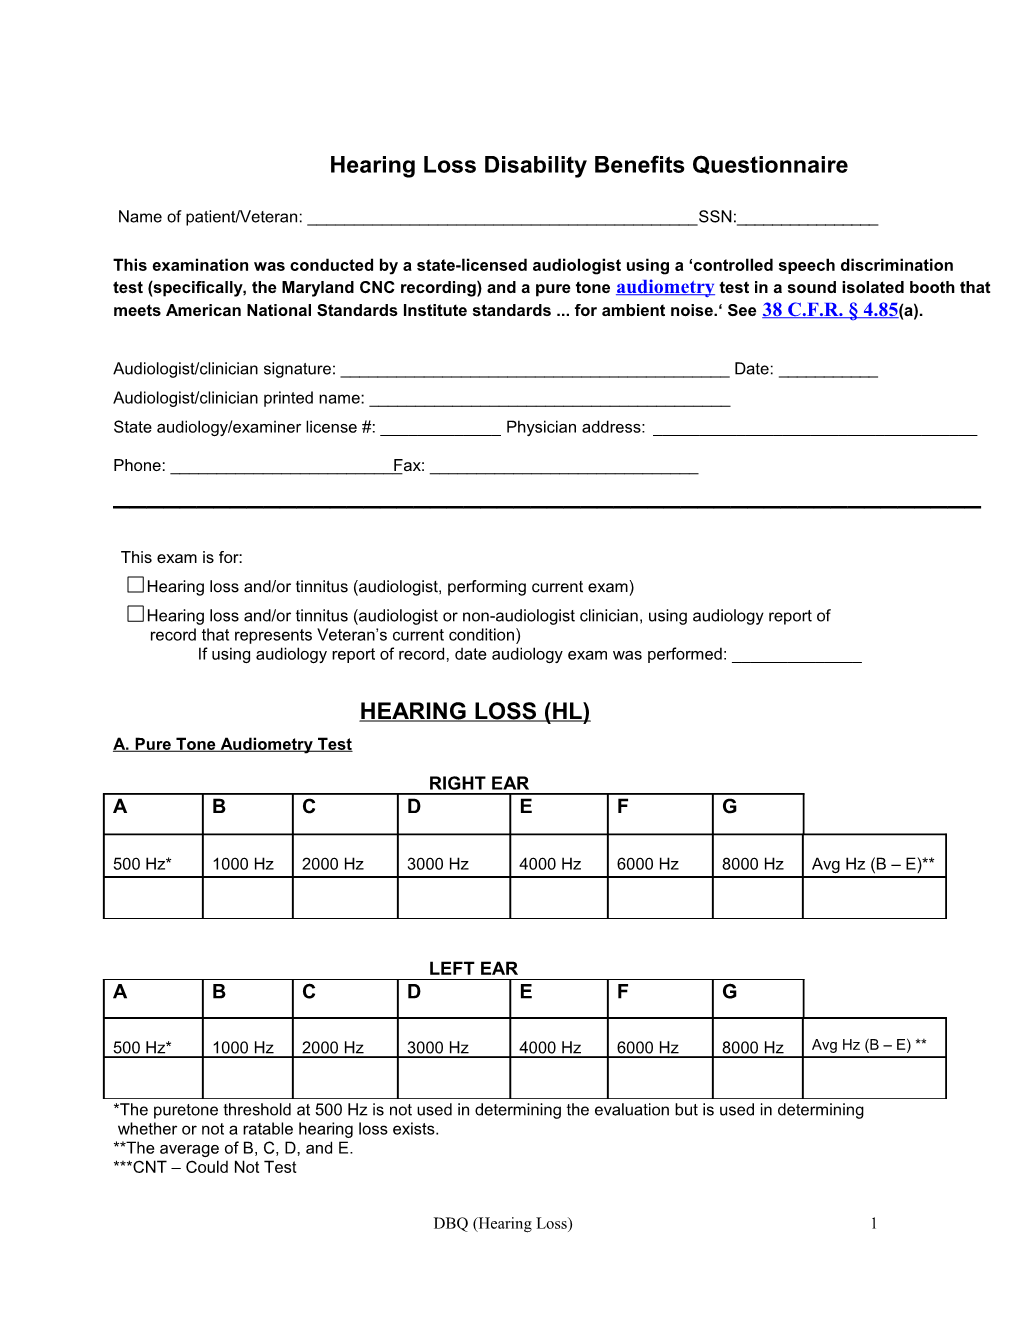 Hearing Loss Disability Benefits Questionnaire